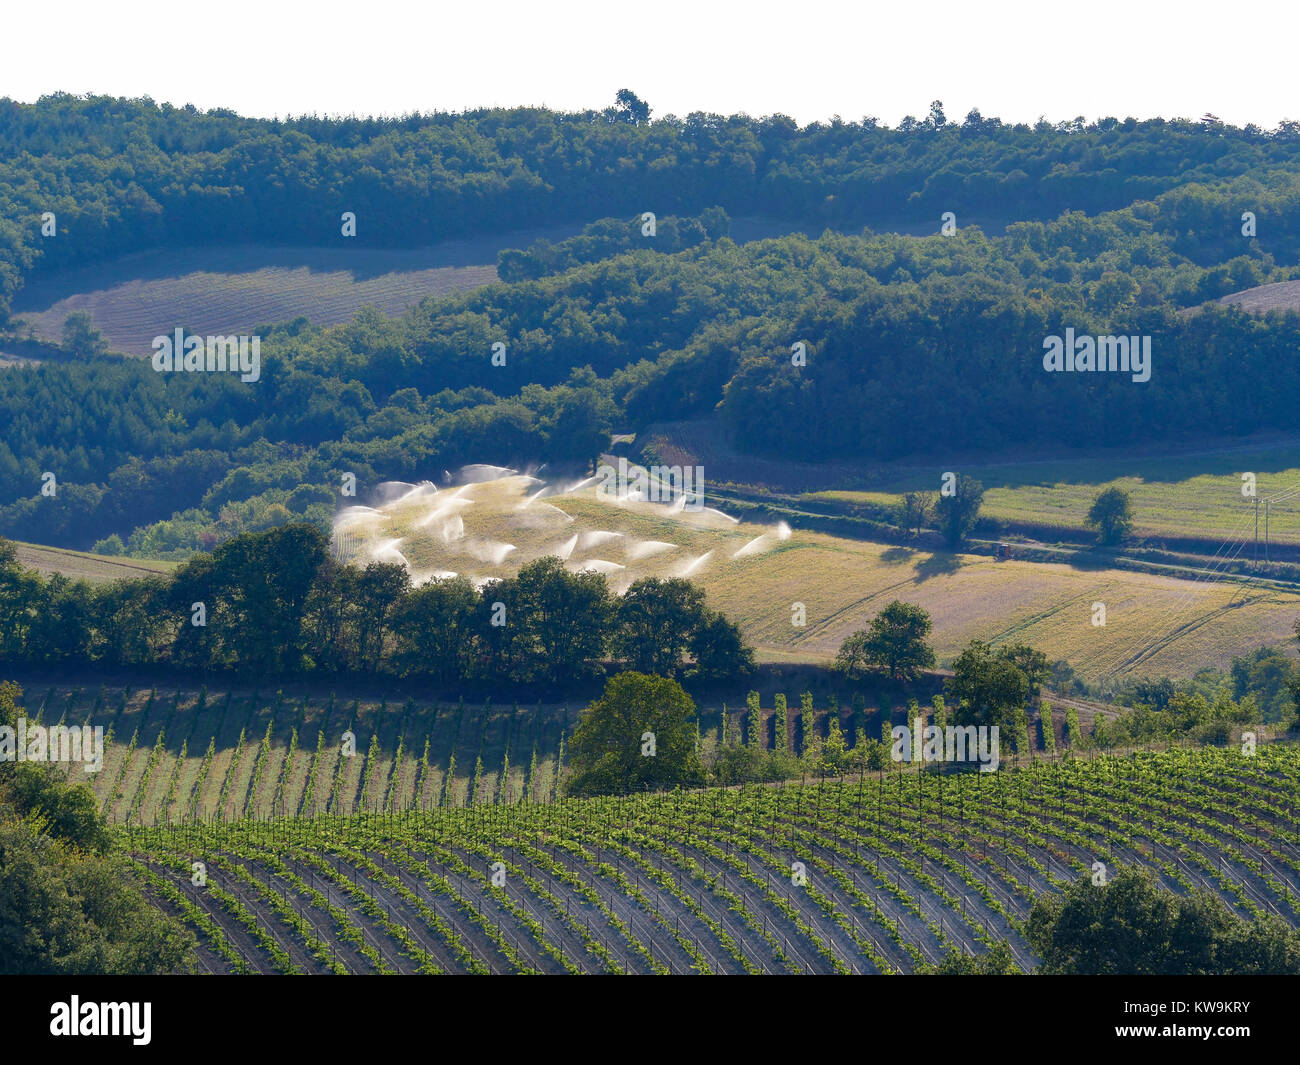 Farm field crops  being sprinkler watered in the south of France heat haze showing vines in the foreground Stock Photo